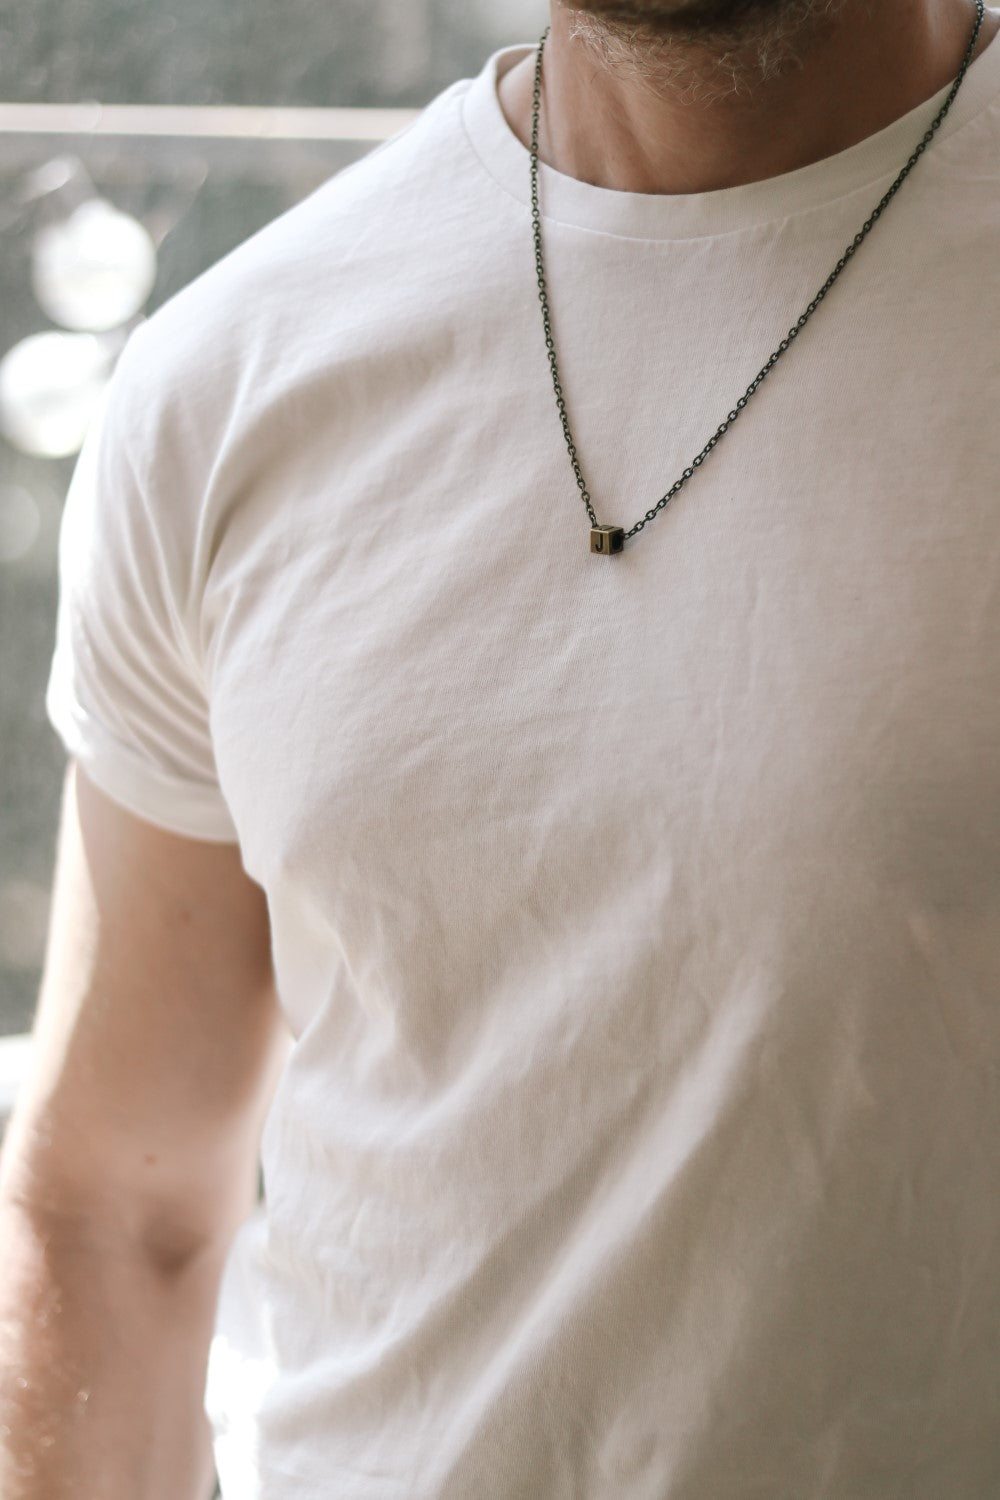 Vnox Free Personalized Custom Initial Name Bar Necklaces For Men,minimalism  Stainless Steel Plain Vertical Pendant Collar Gift - Necklace - AliExpress